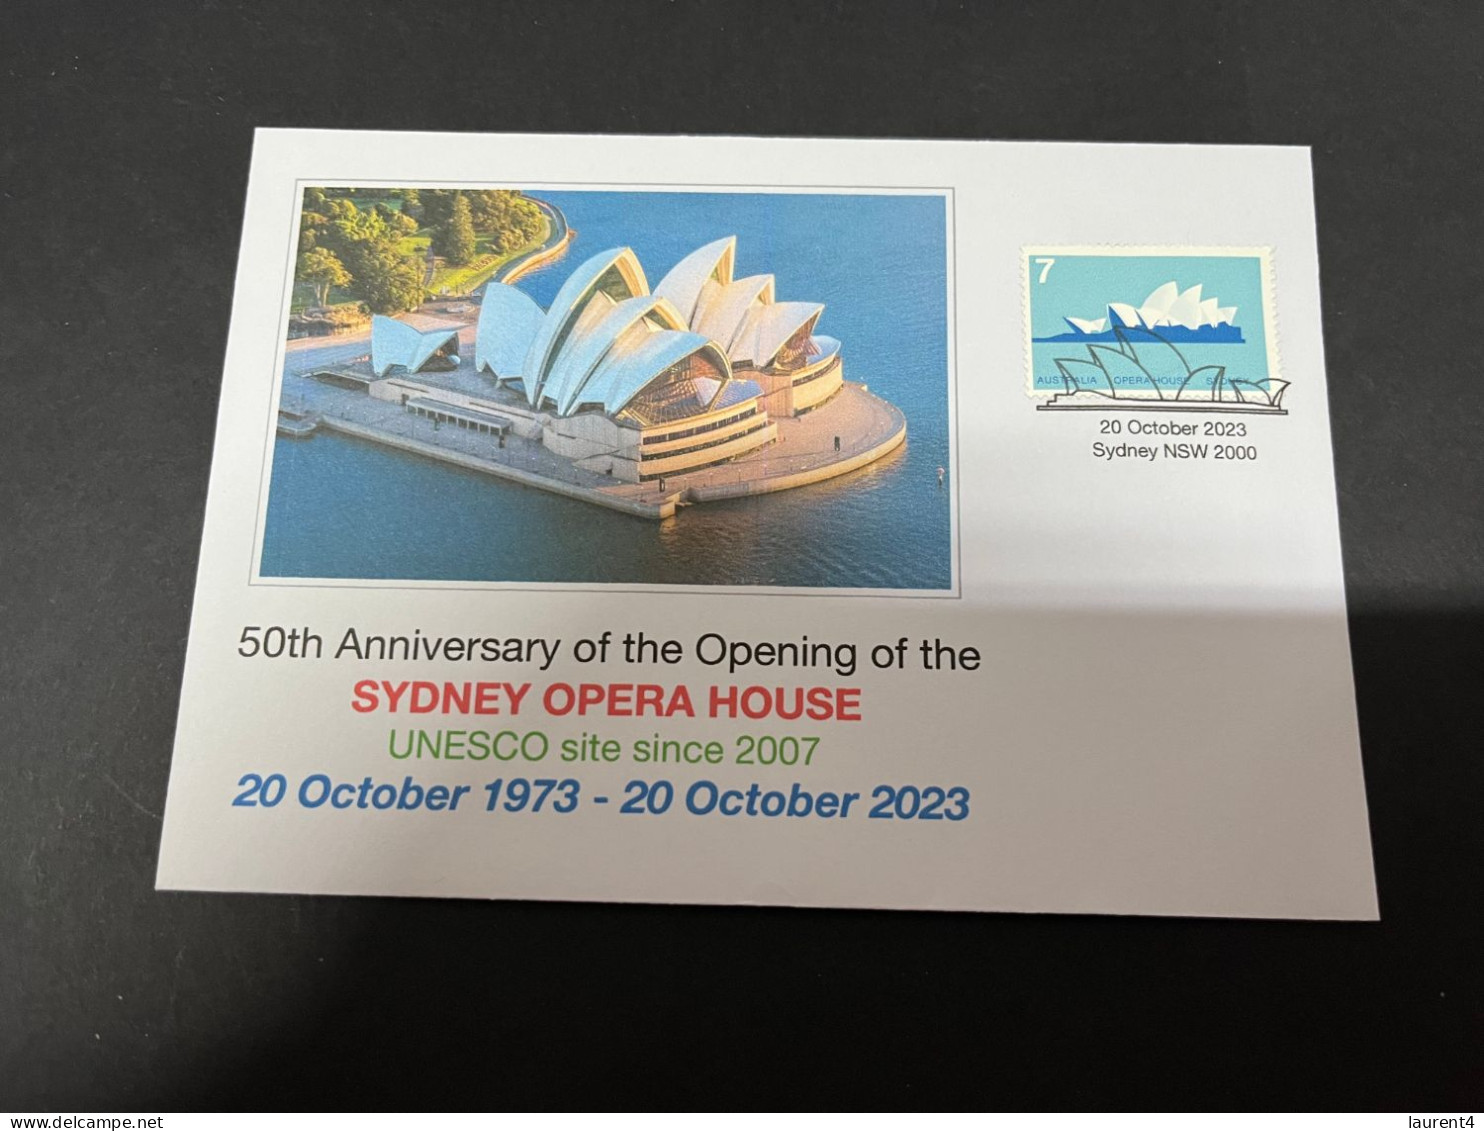 6-10-2023 (3 U 27) Sydney Opera House Celebrate 50th Anniversary (20-10-2023) 2 Covers - Covers & Documents